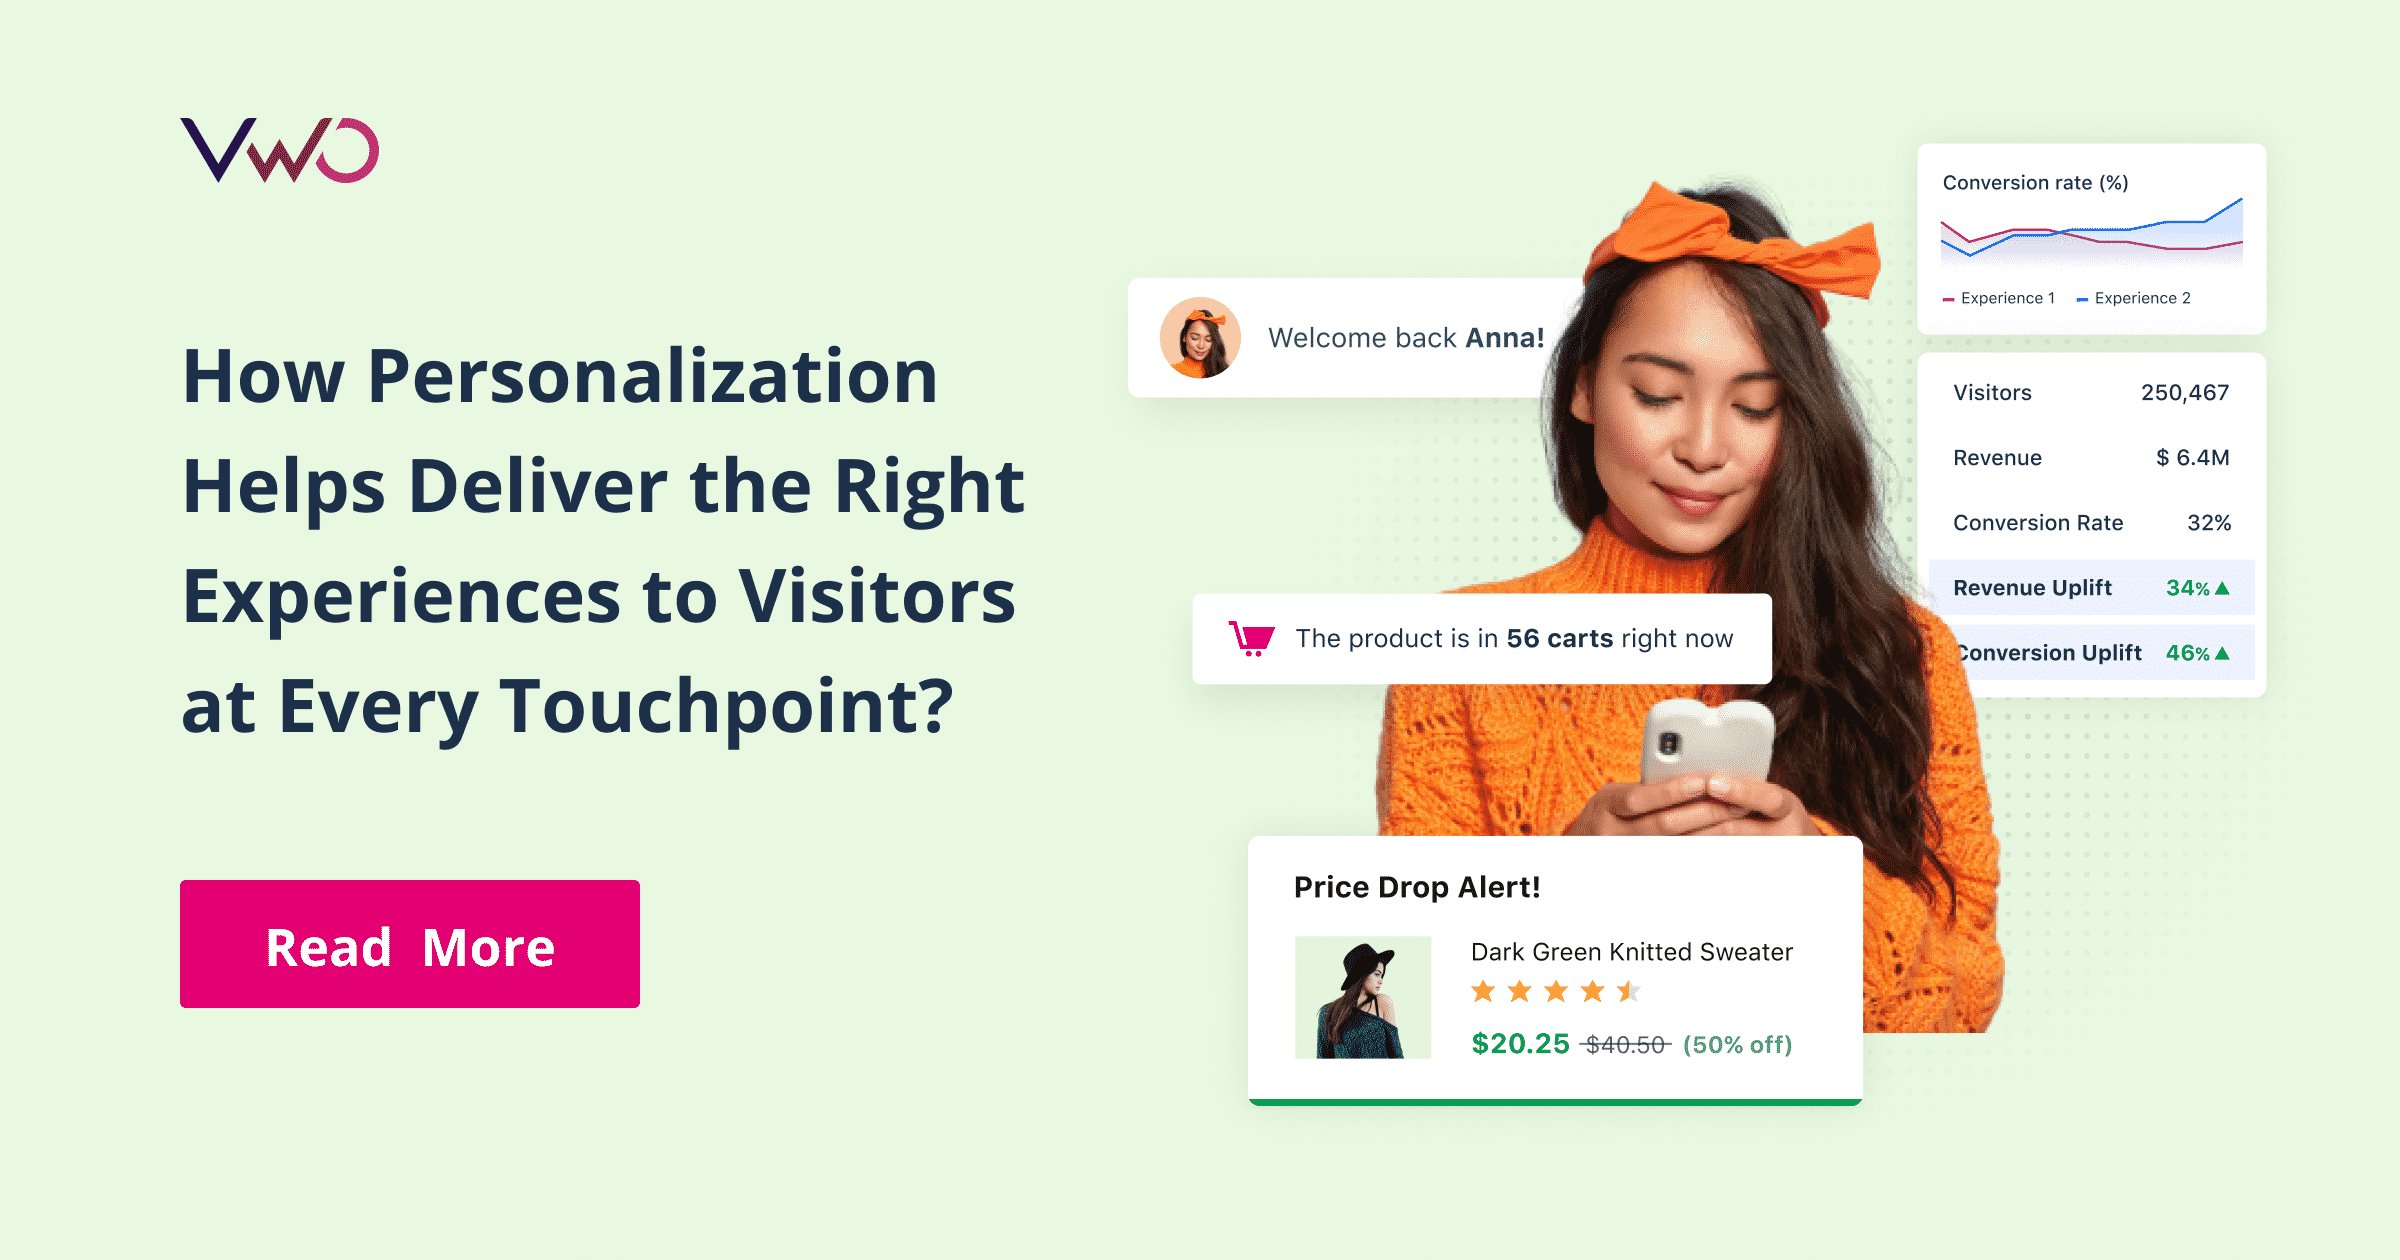 How Personalization Helps Deliver the Right Experiences to Visitors at Every Touchpoint? 